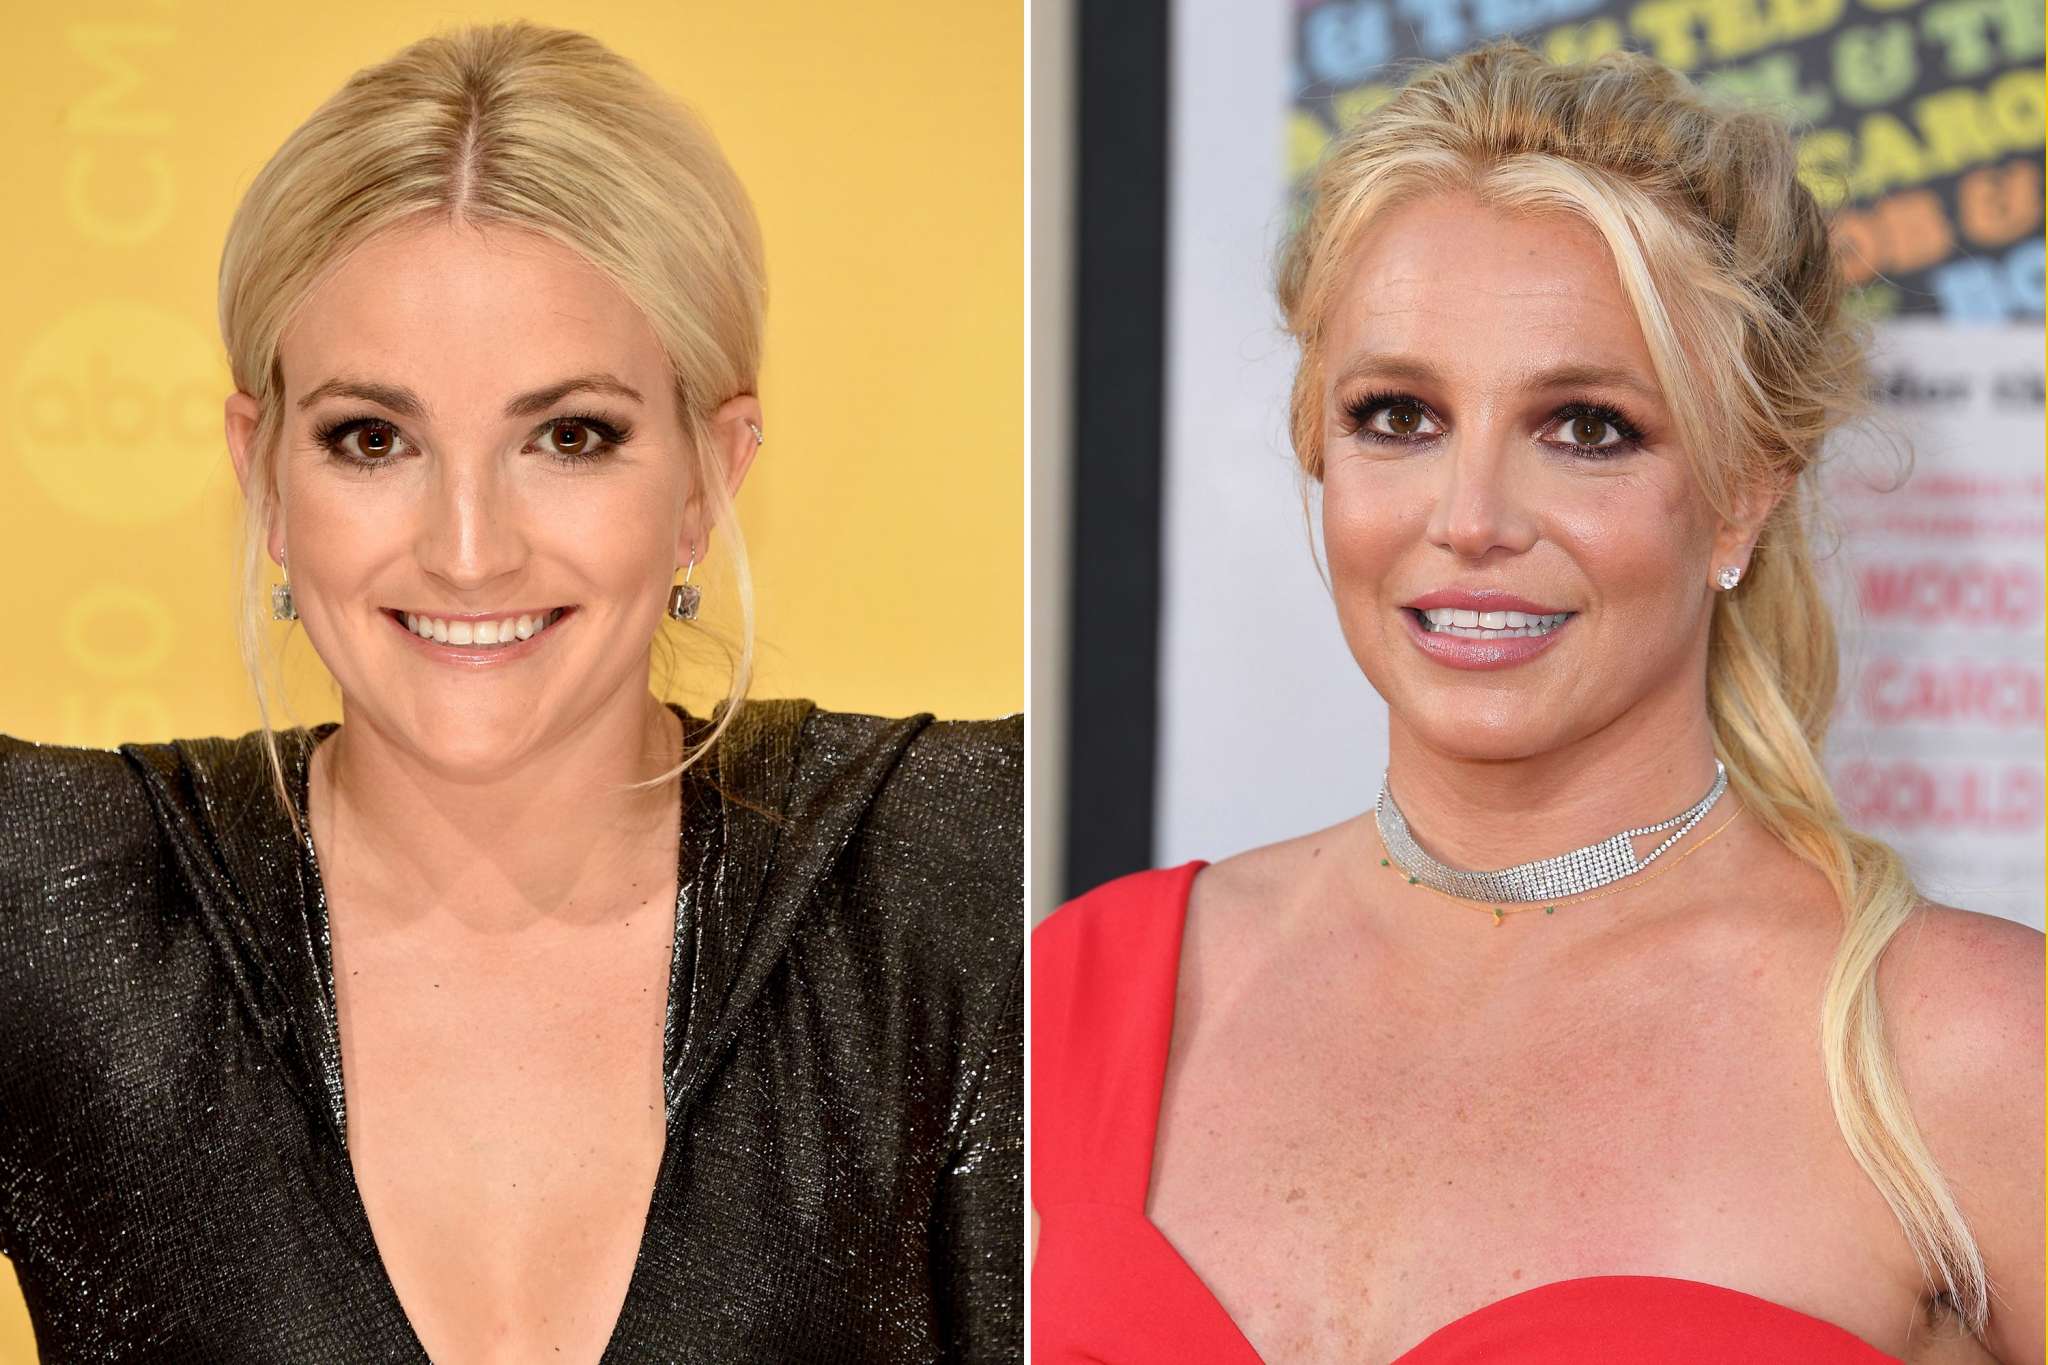 jamie-lynn-spears-calls-out-britney-spears-fans-for-sending-death-threats-to-her-and-her-children